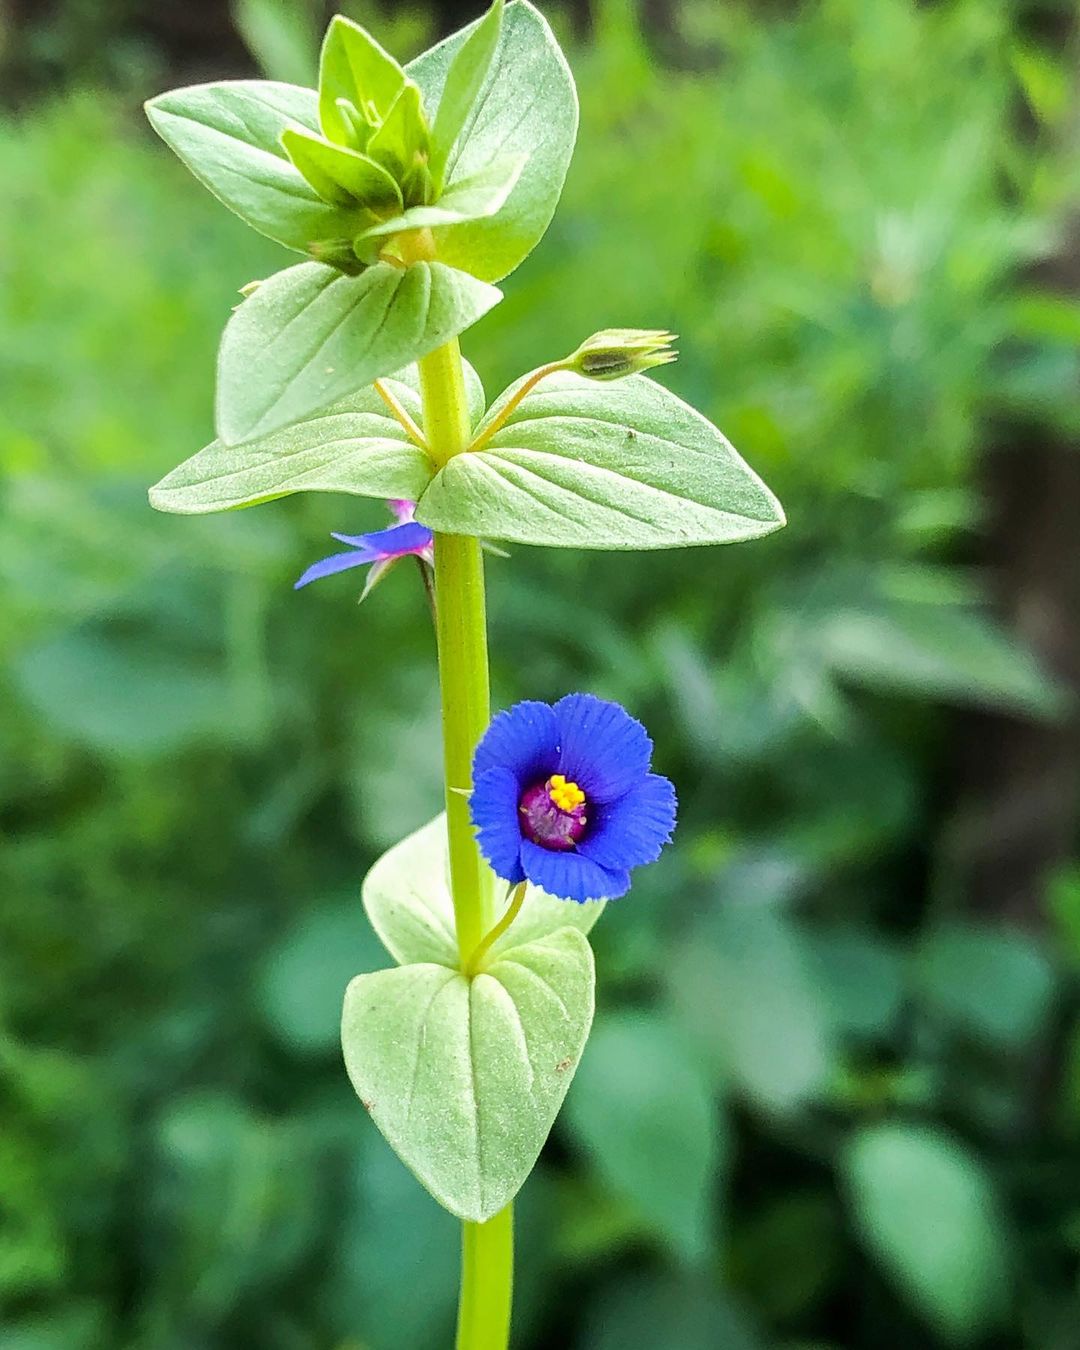 A blue Pimpernel flower with a yellow center, blooming in the midst of a lush green plant.